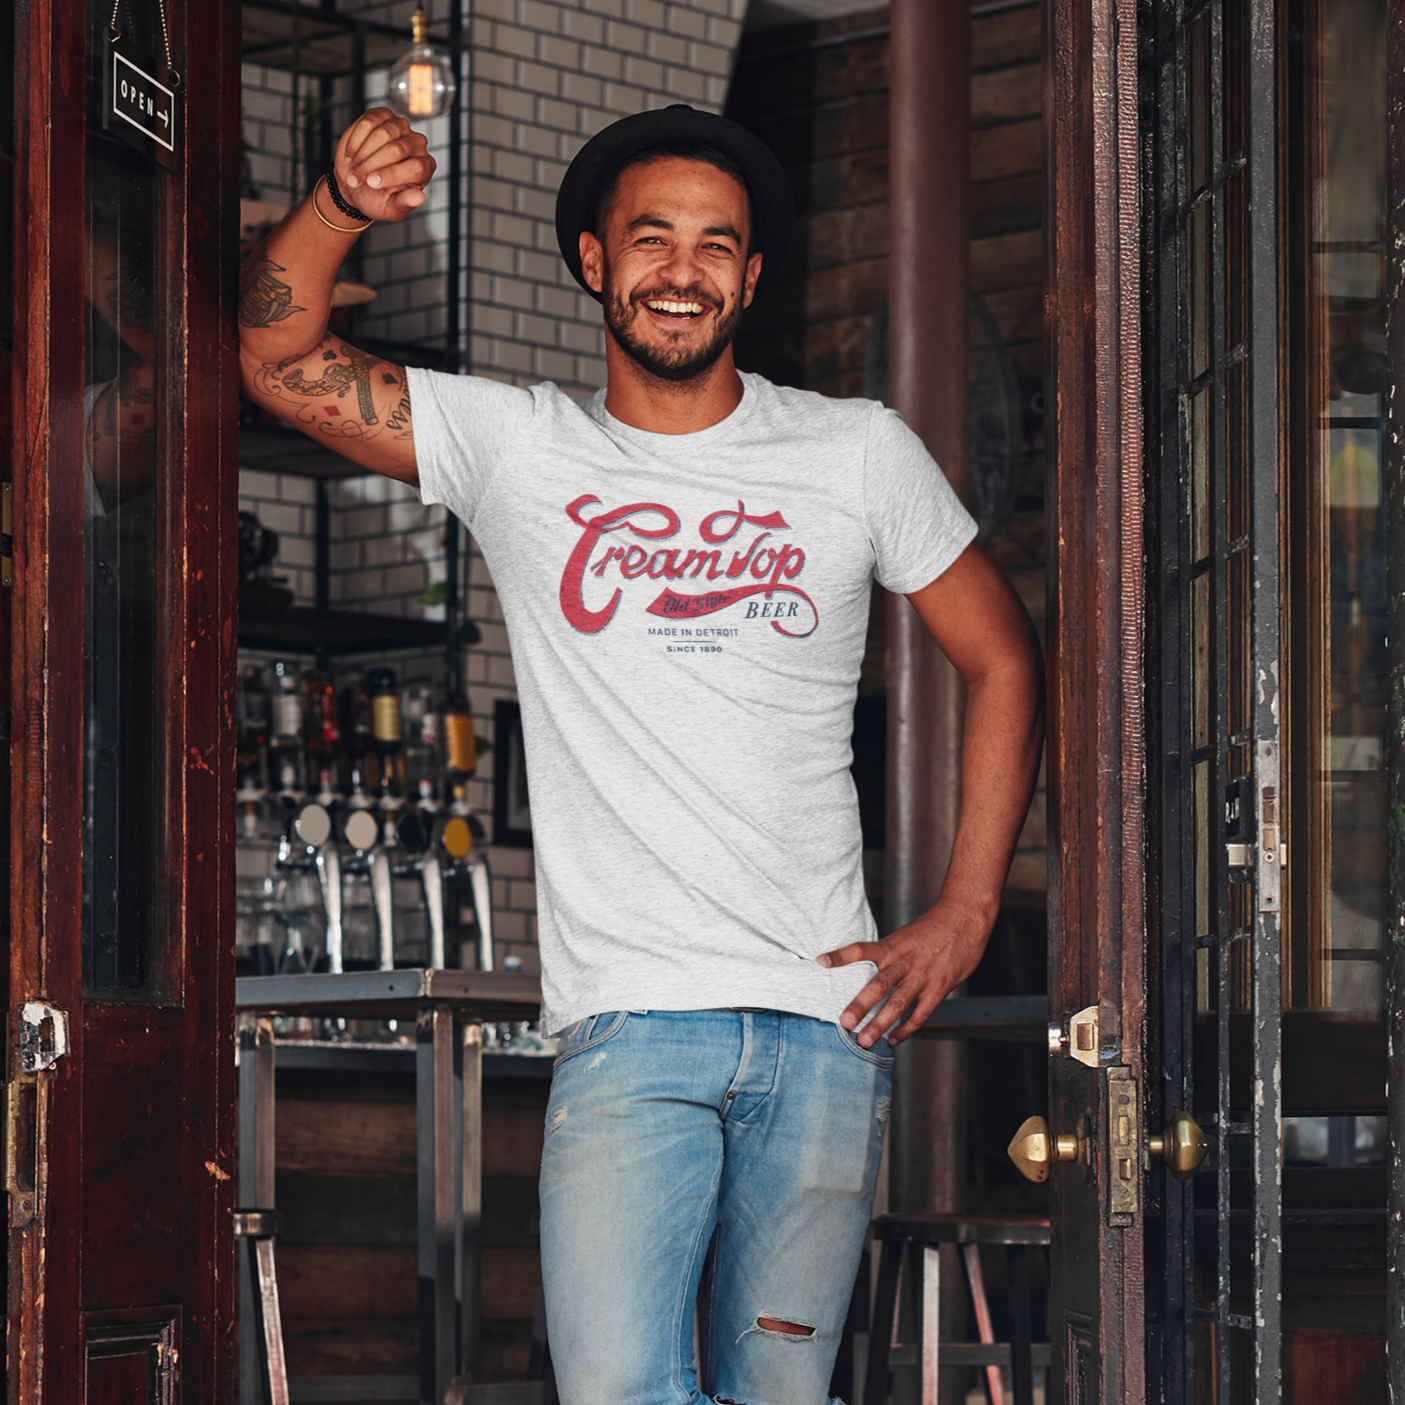 Cream Top Beer T-Shirt – 100% Made in the USA!